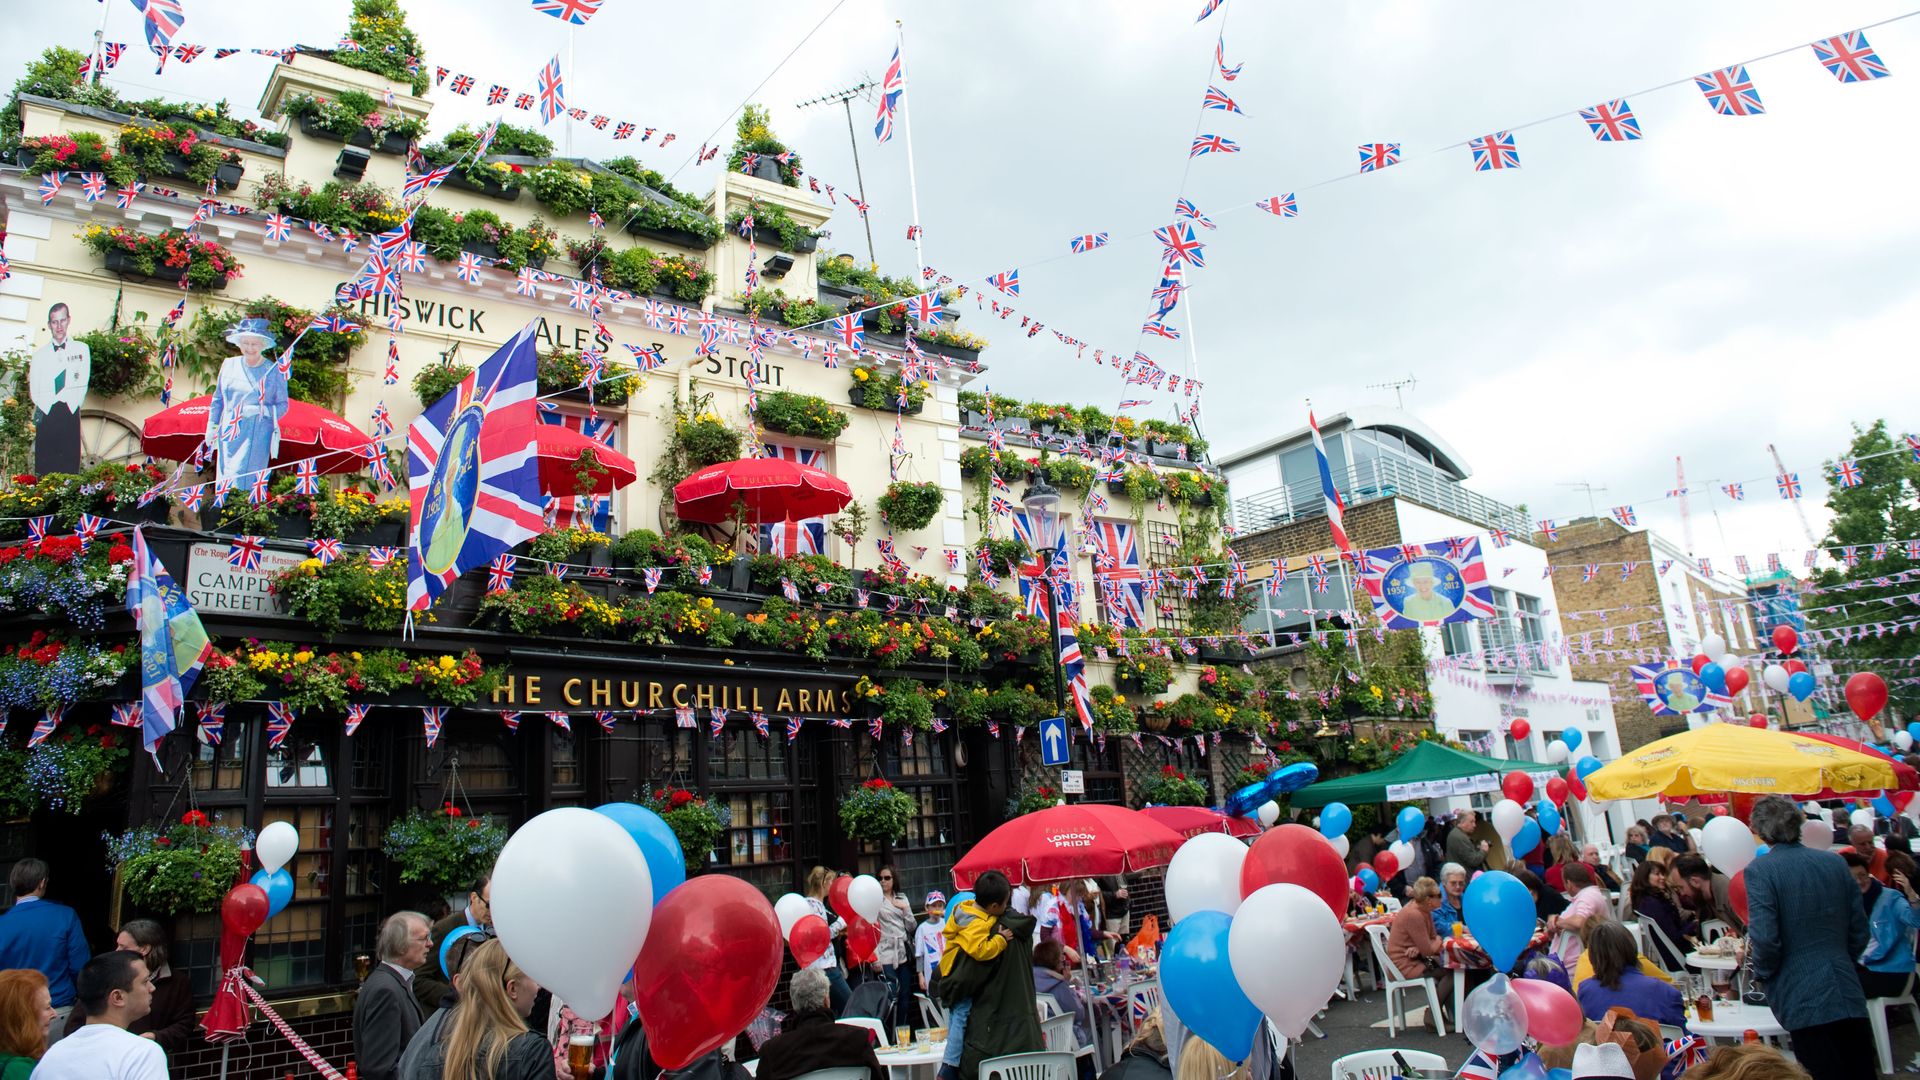 LONDON, ENGLAND - JUNE 4: Residents enjoy a street party in Kensington during the Queen's Diamond Jubilee celebrations on June 4, 2012 in London, England. For only the second time in its history the UK celebrates the Diamond Jubilee of a monarch. (Photo b